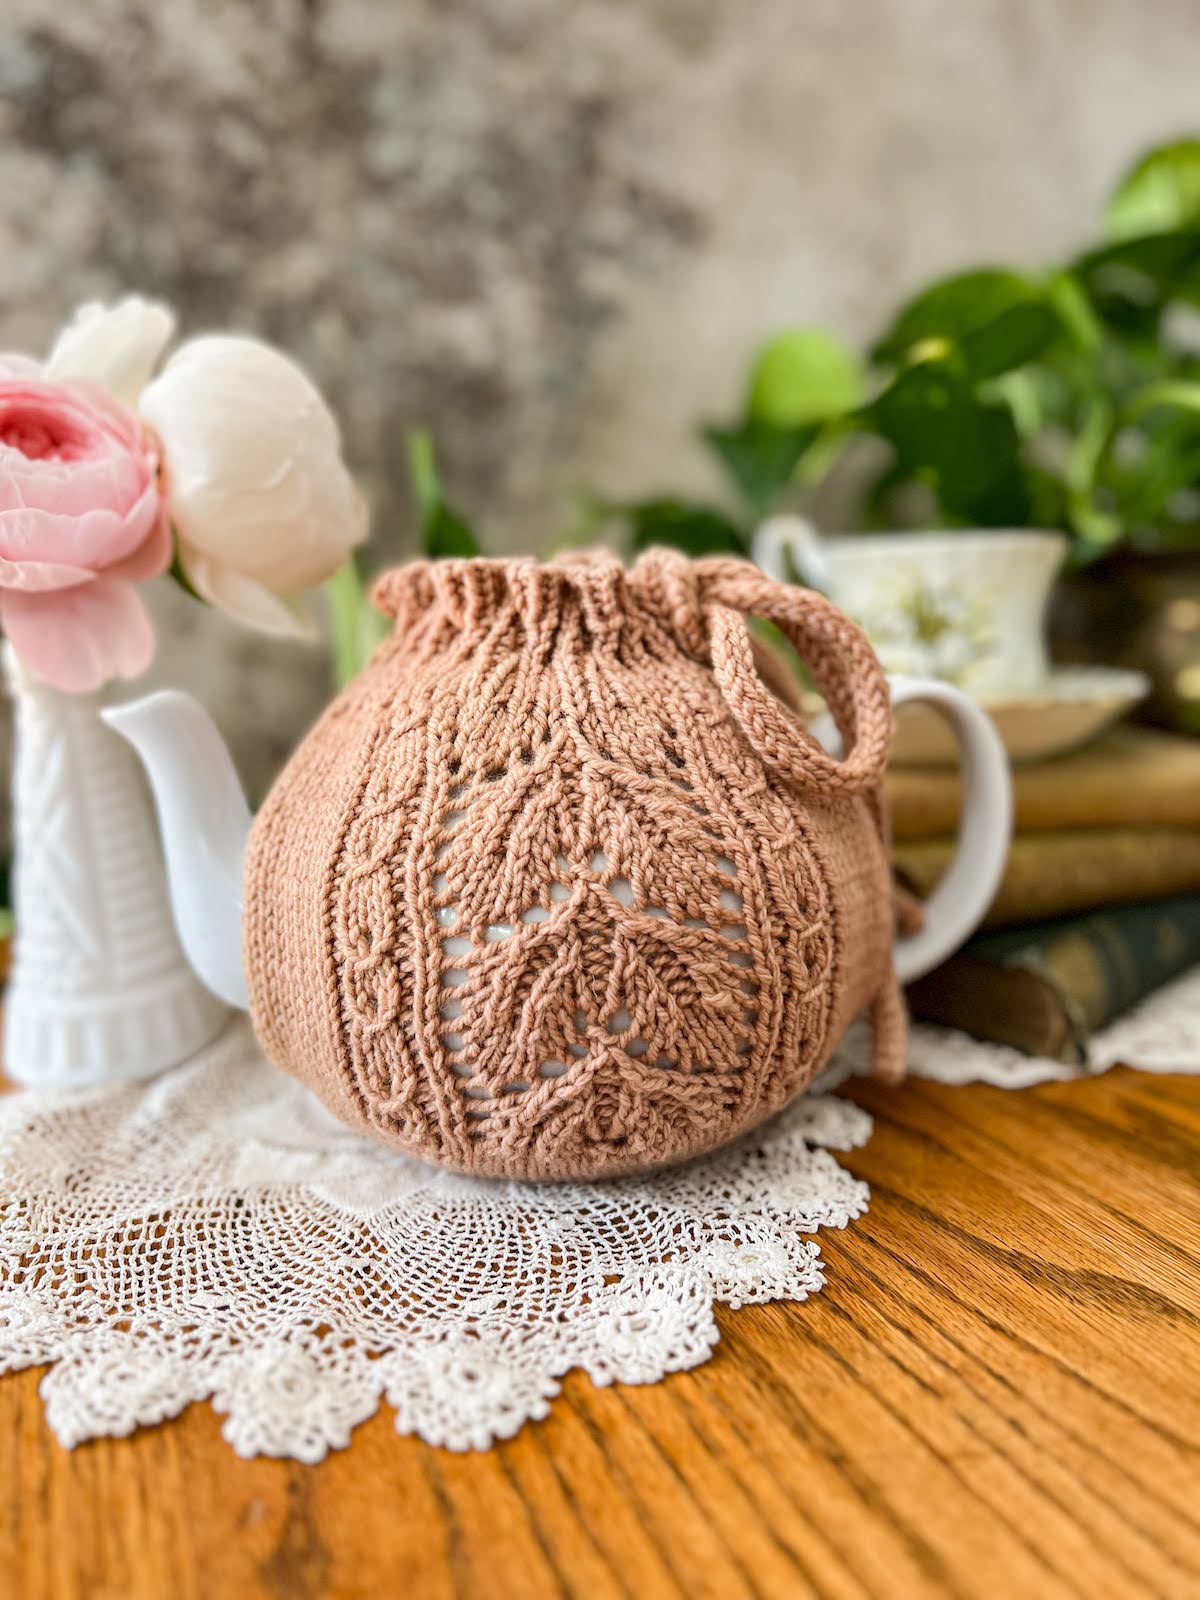 A straight-on view of the side of a clay-colored handknit tea cozy tied over a white teapot. The Emily's Garden Tea Cozy features panels of leafy lace and coin lace on each side of the cozy, and it's held together with a drawstring at the top.